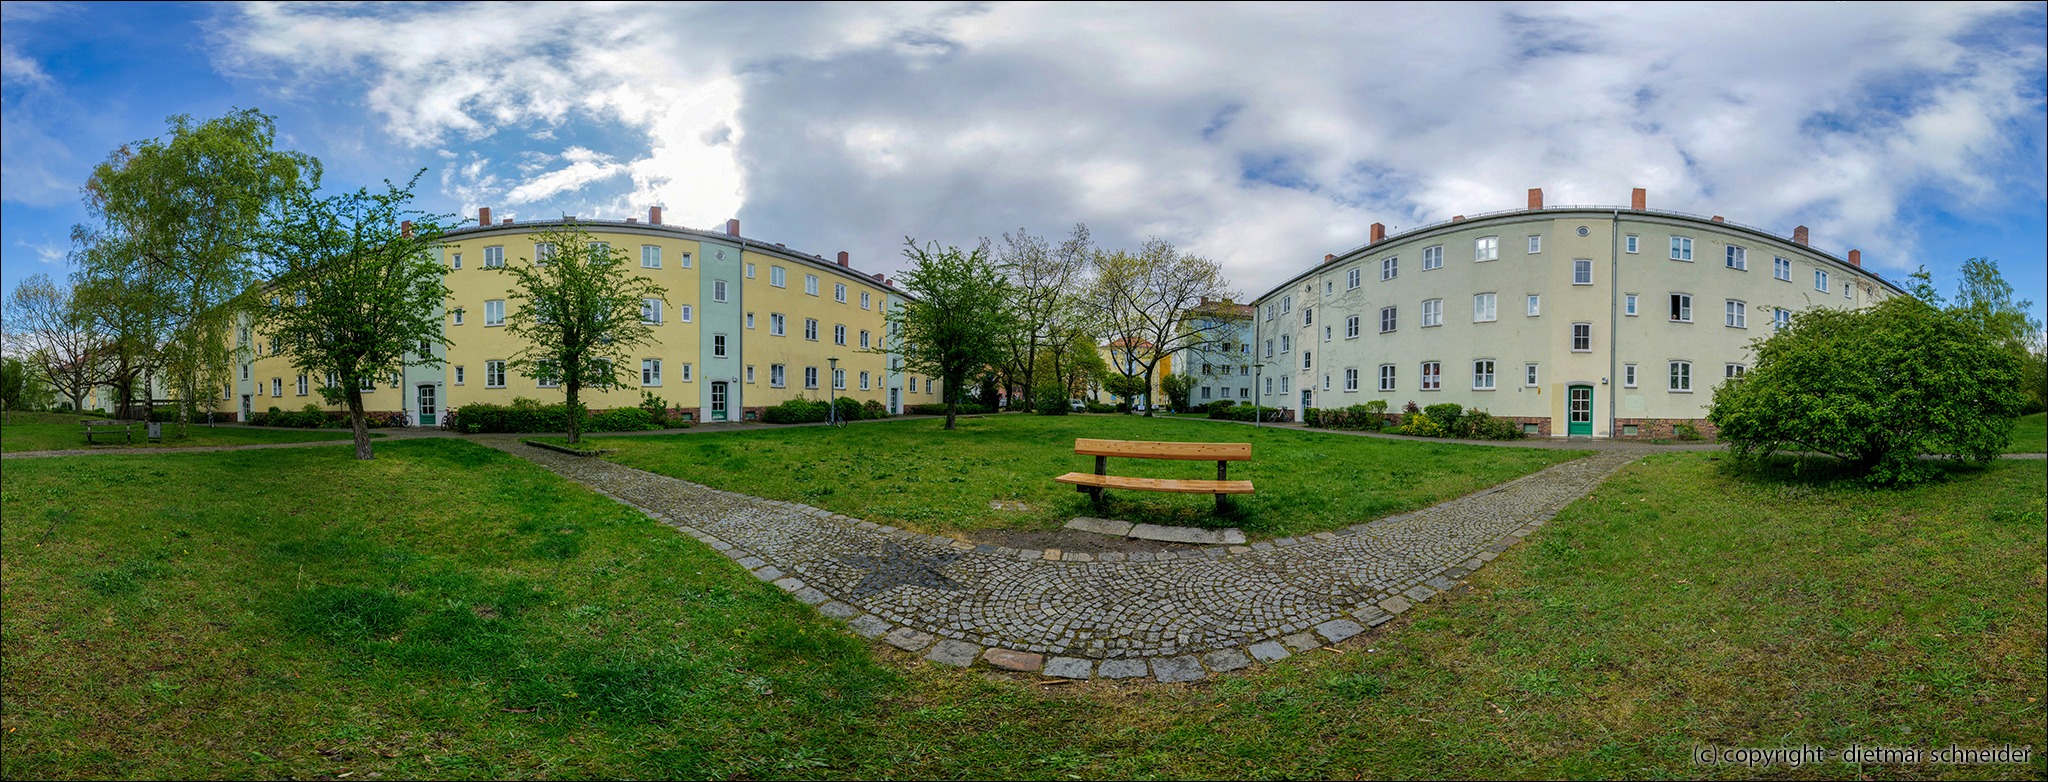 Read more about the article Panorama – Mierendorffinsel – Olbersstrasse 49-51 (16.04.2017)